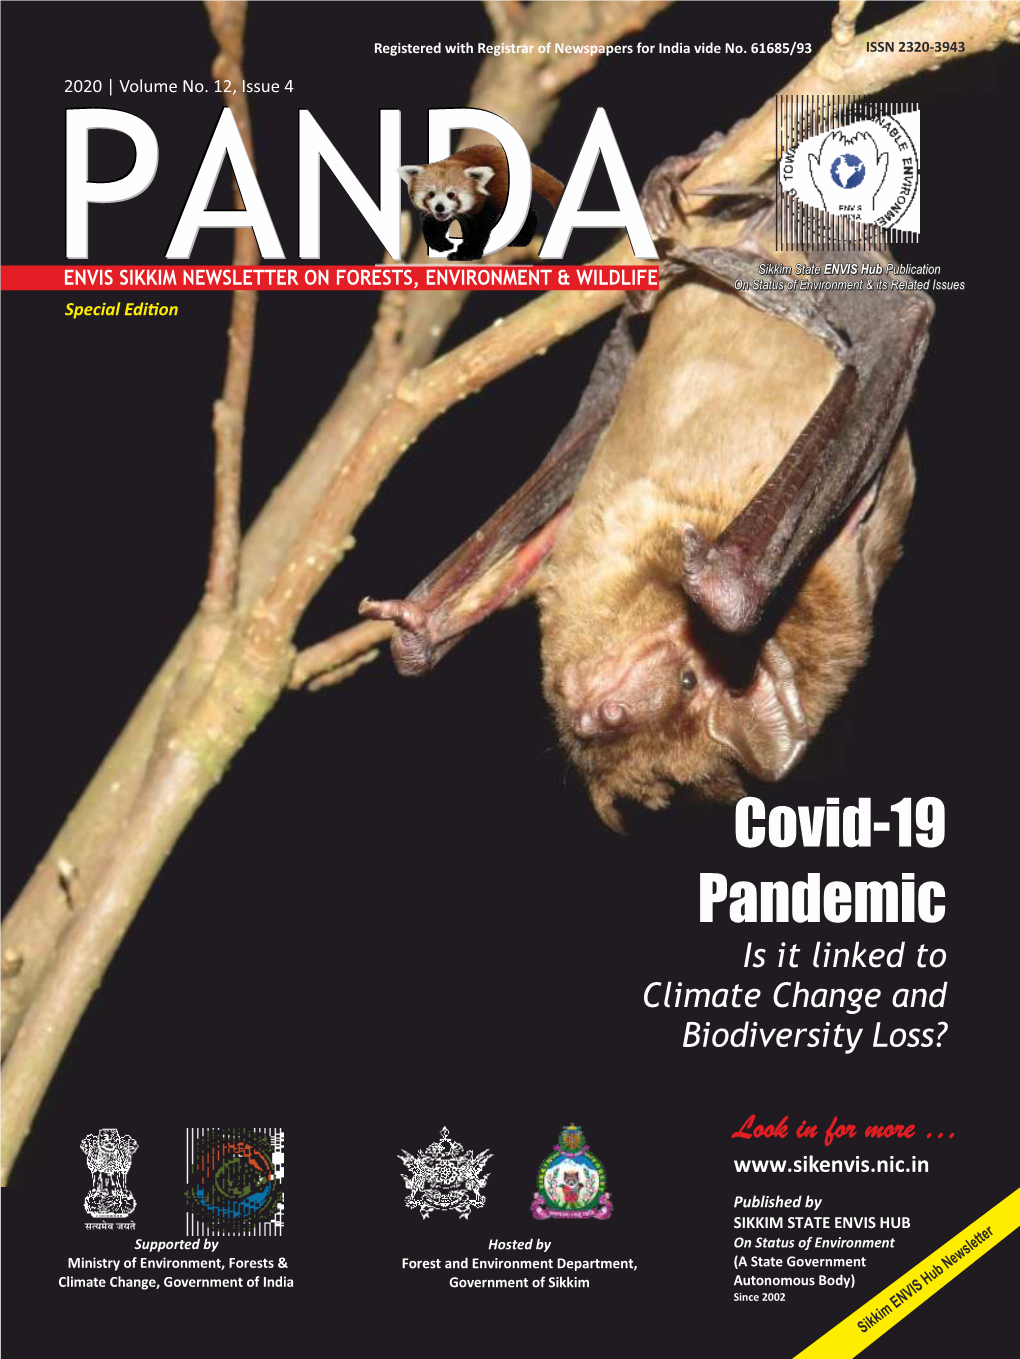 Covid-19 Pandemic Is It Linked to Climate Change and Biodiversity Loss?